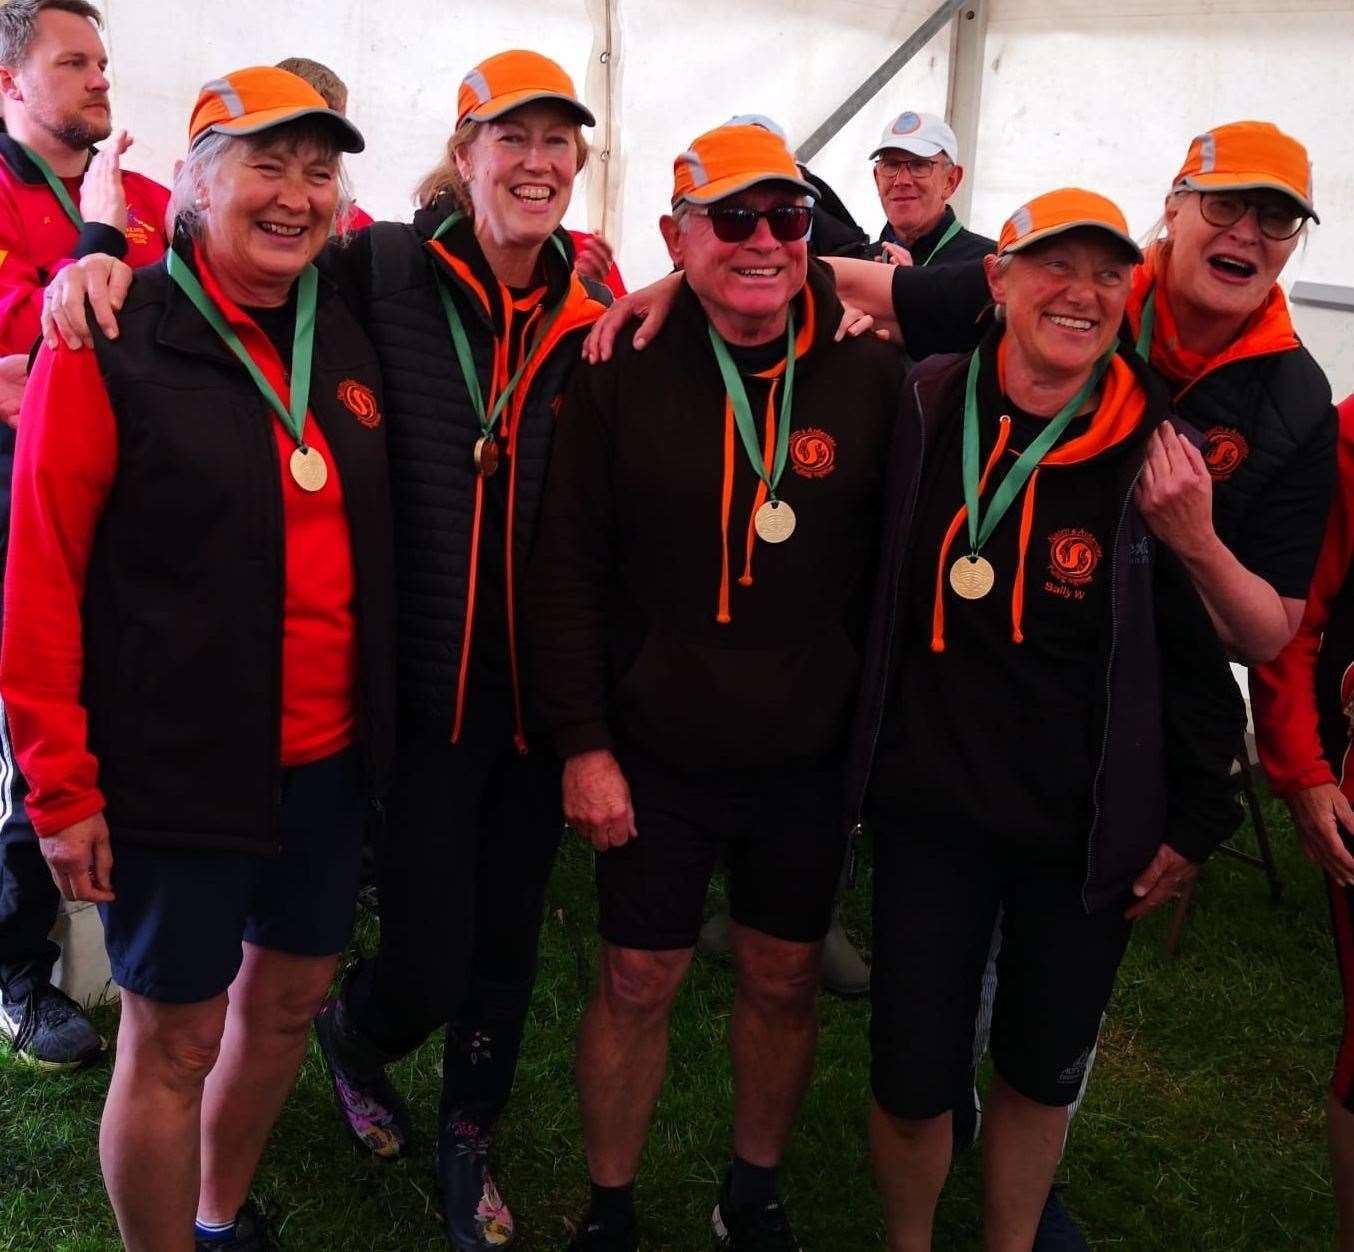 Nairn Coastal Rowing Club's 60+ ladies won a gold medal and the Kate MacPhail Trophy at the Ullapool regatta.